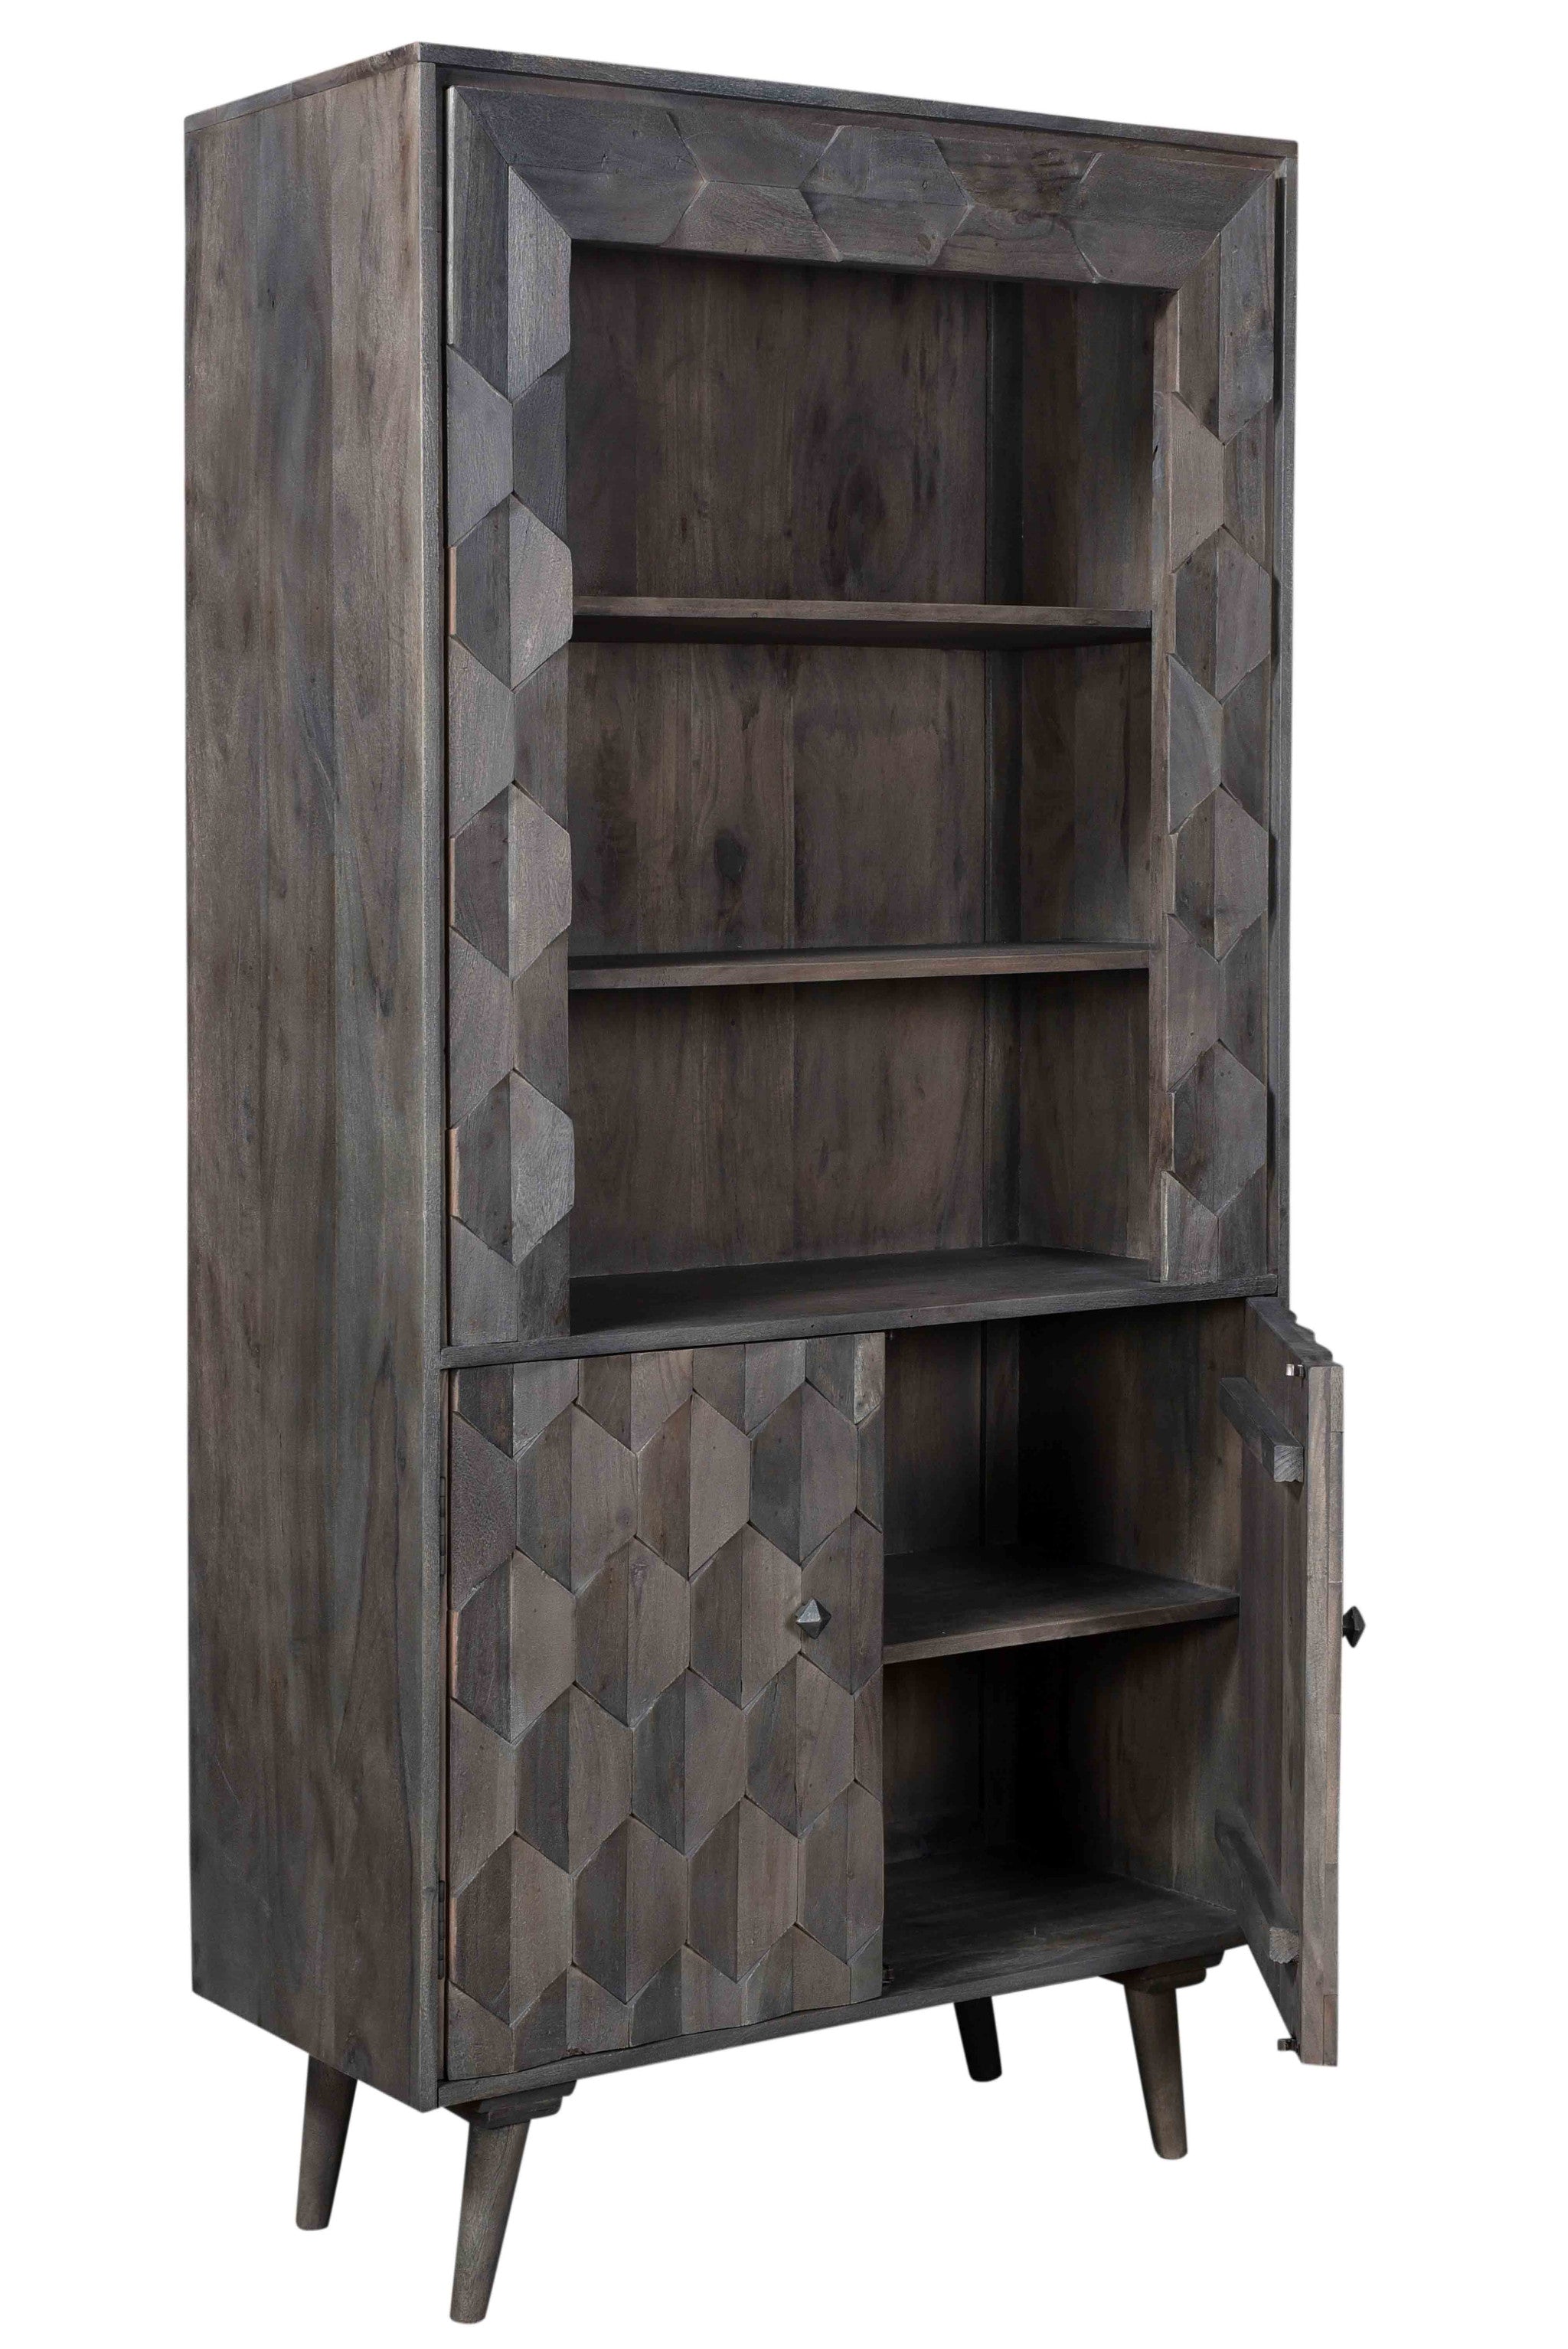 70" Distressed Solid Wood Three Tier Bookcase with Two doors